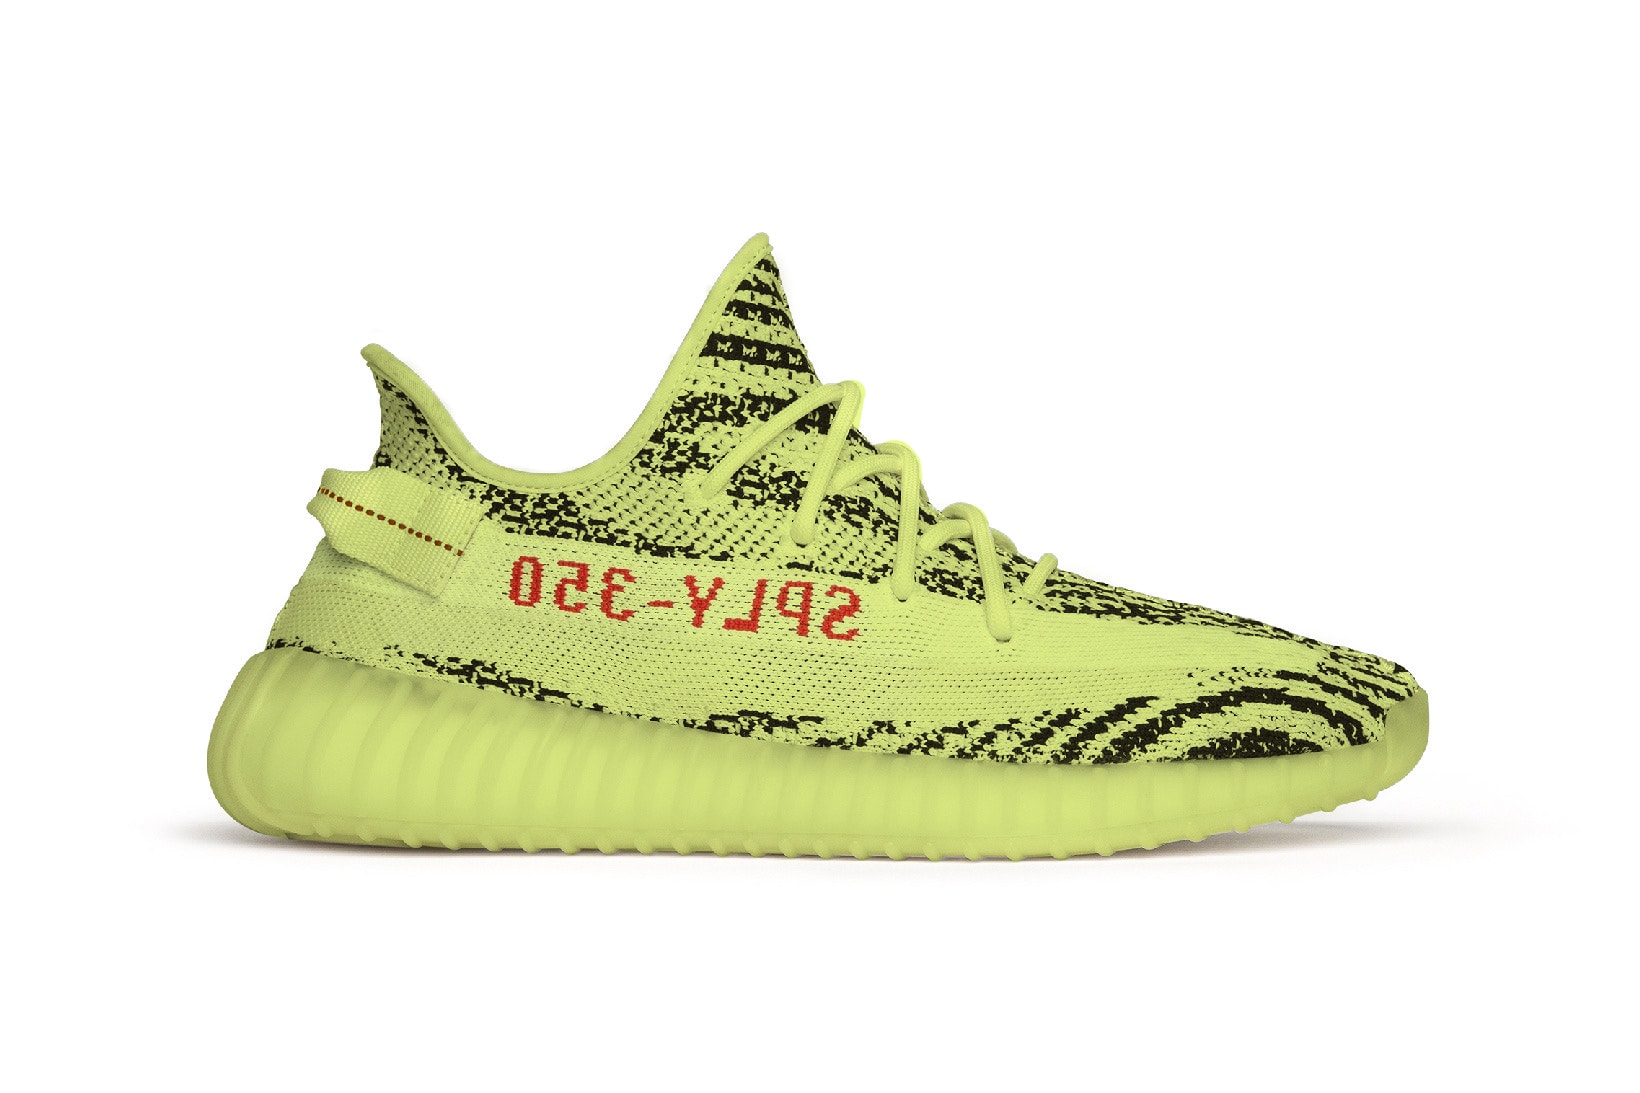 Kanye West adidas YEEZY BOOST 350 V2 Semi Frozen Yellow On Foot wearing wears airport traveling 